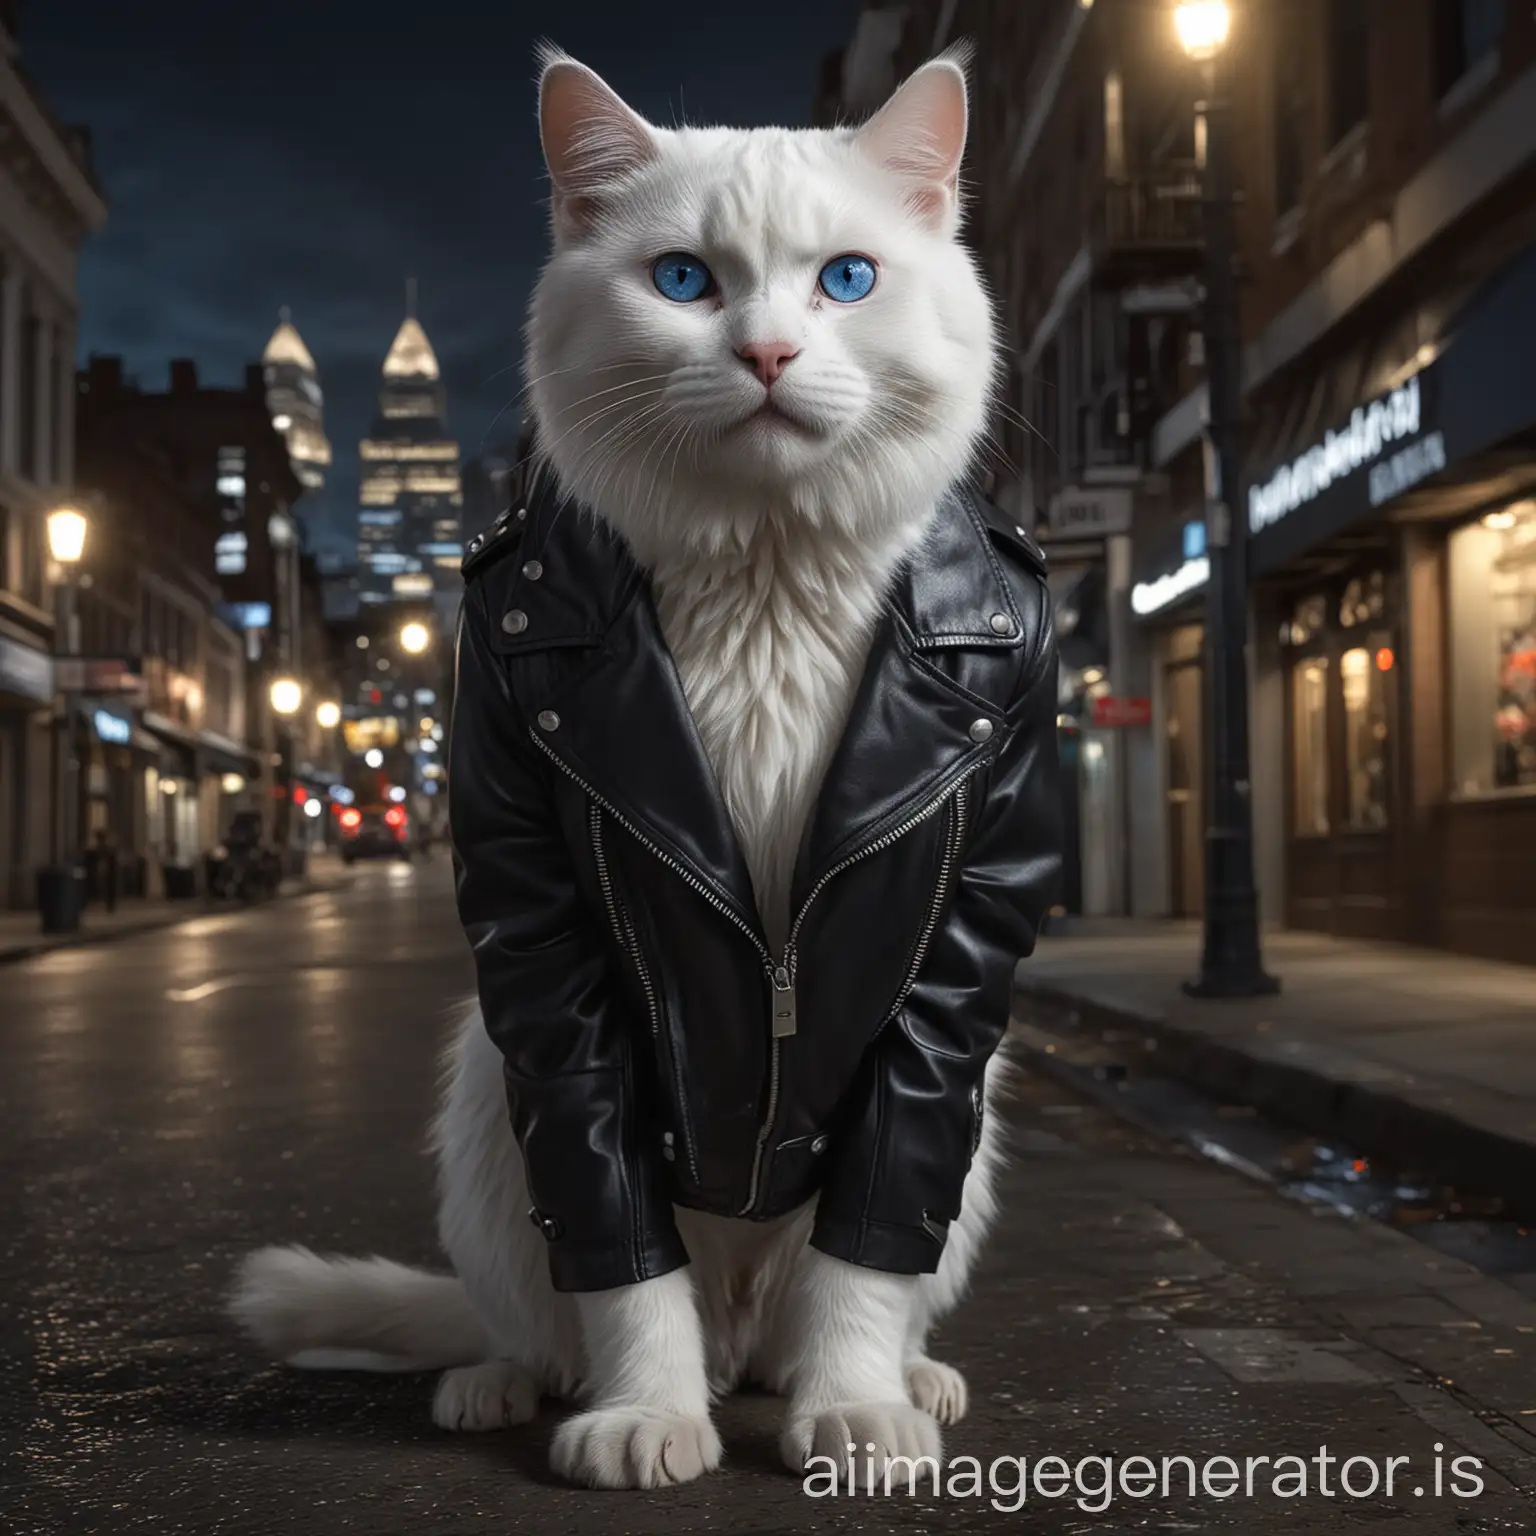 white cat, deep blue eyes, black leather jacket, gorilla, downtown, night shot, reflecting lights, ultra realistic, high resolution, real photography